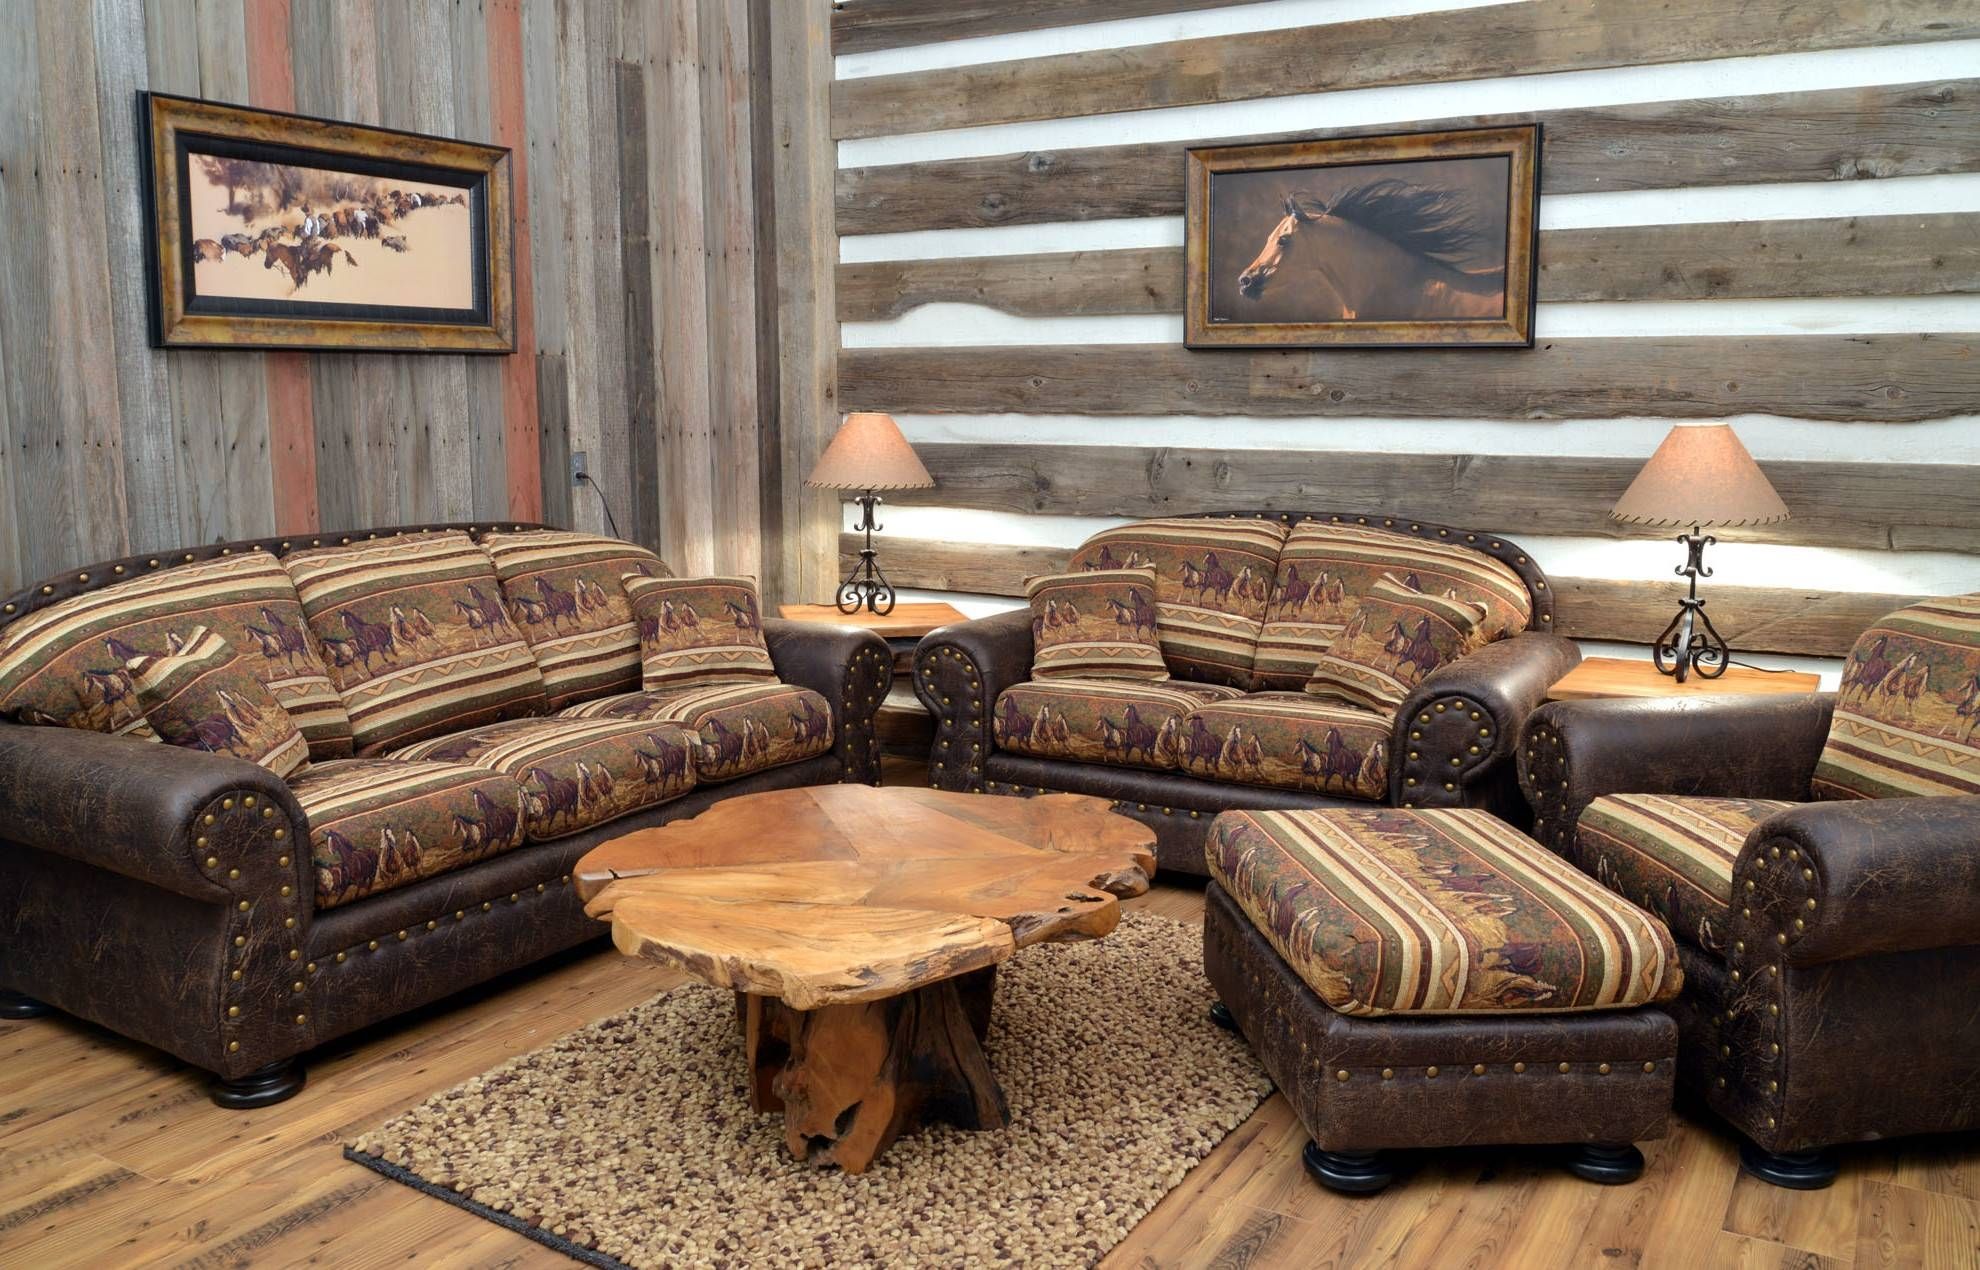 Rustic Style Sofas | Tehranmix Decoration Inside Western Style Sectional Sofas (View 7 of 30)